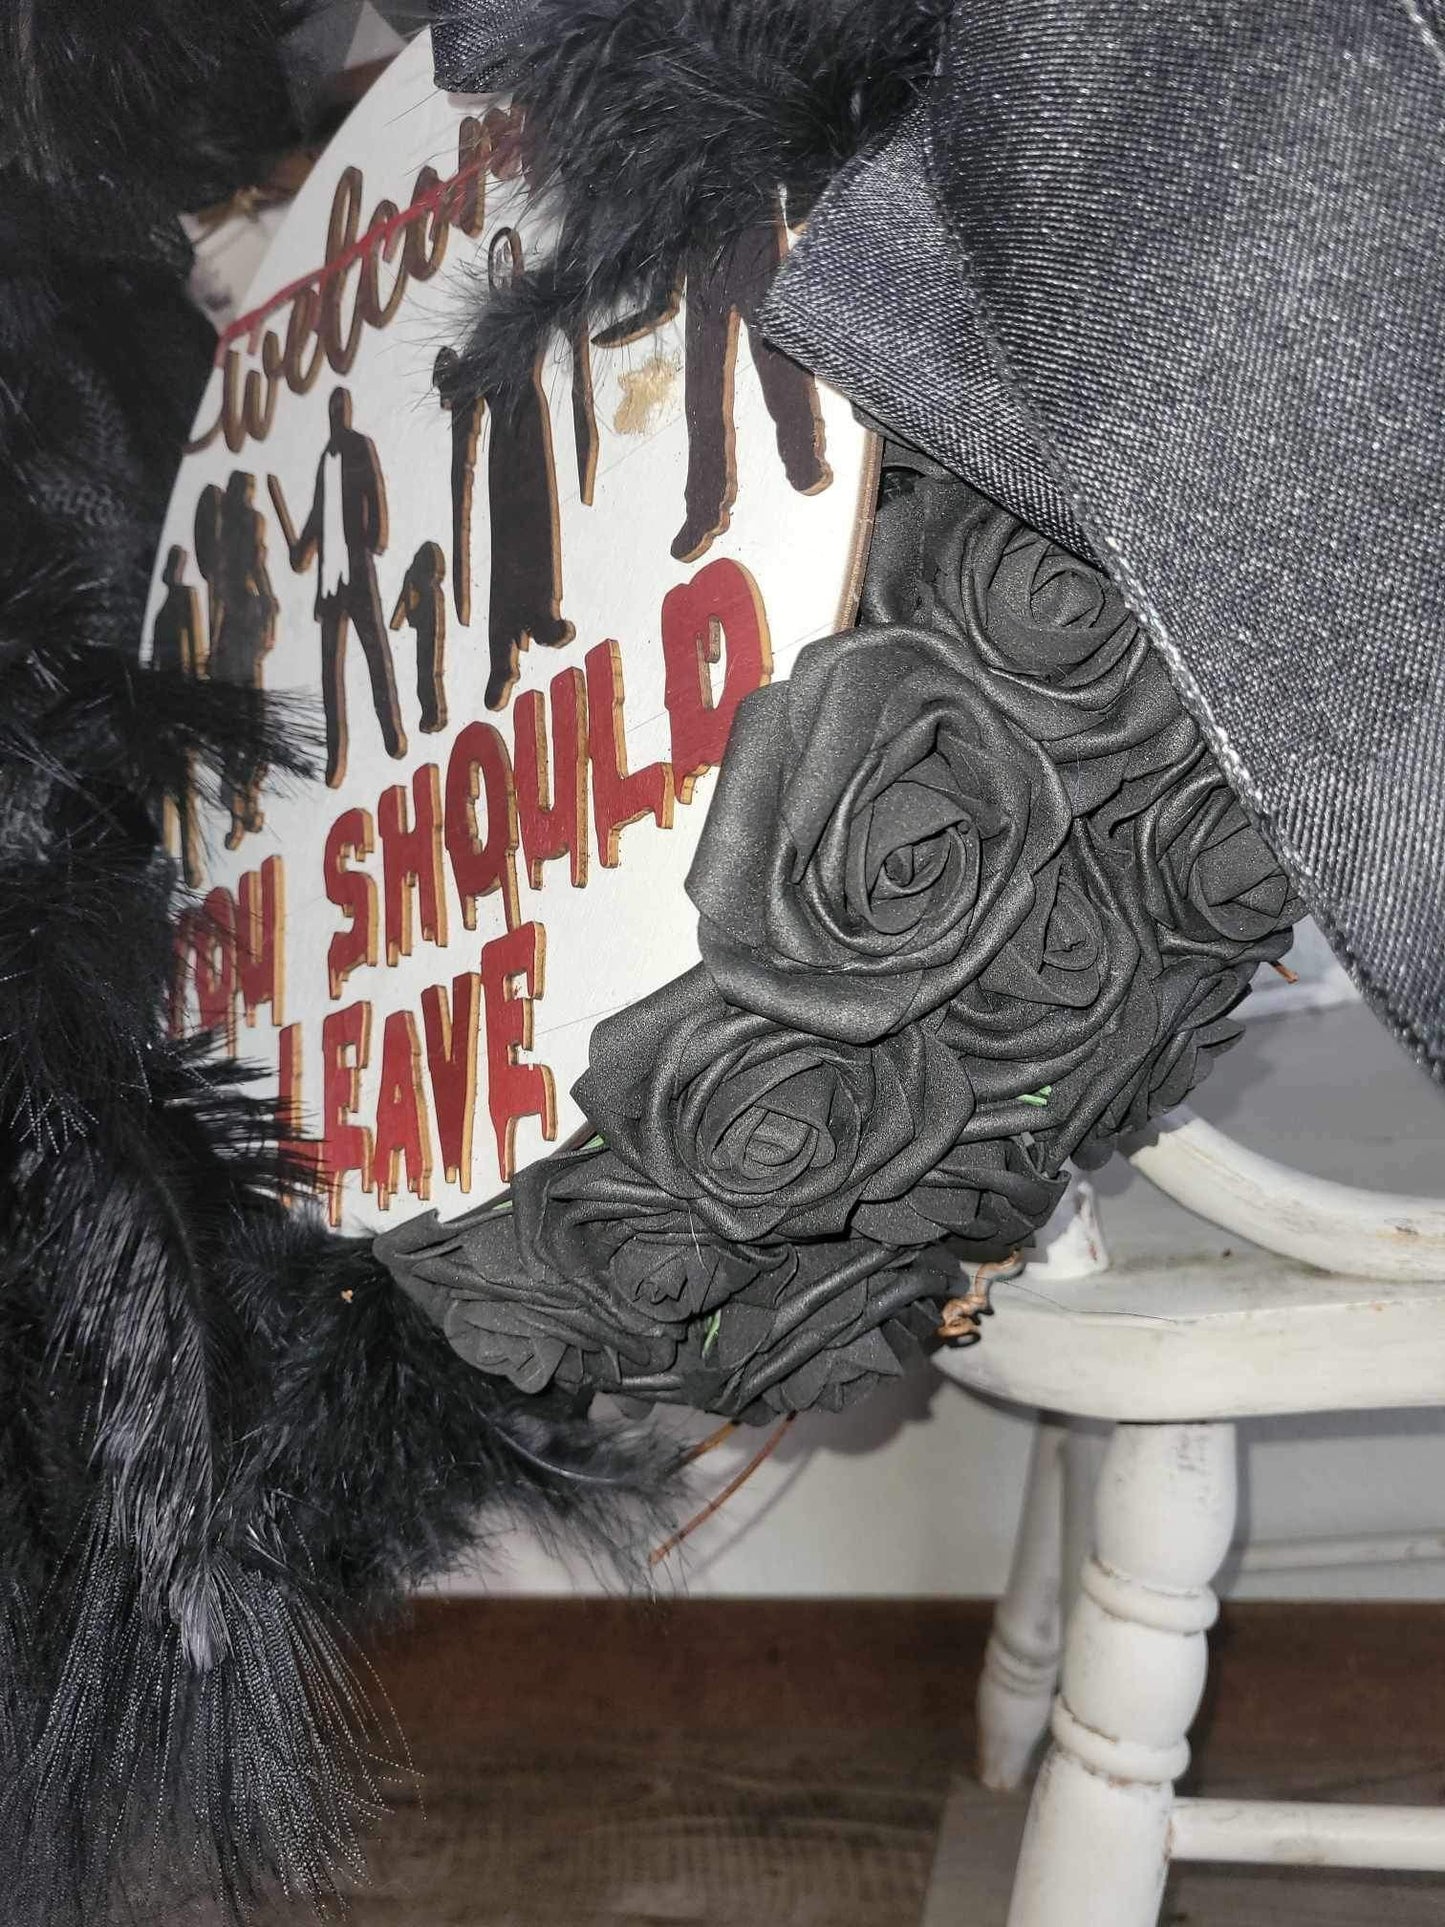 EXTRA LARGE Handmade Gothic “Welcome” wreath, Black roses, faux feathers, Unique, One of a Kind